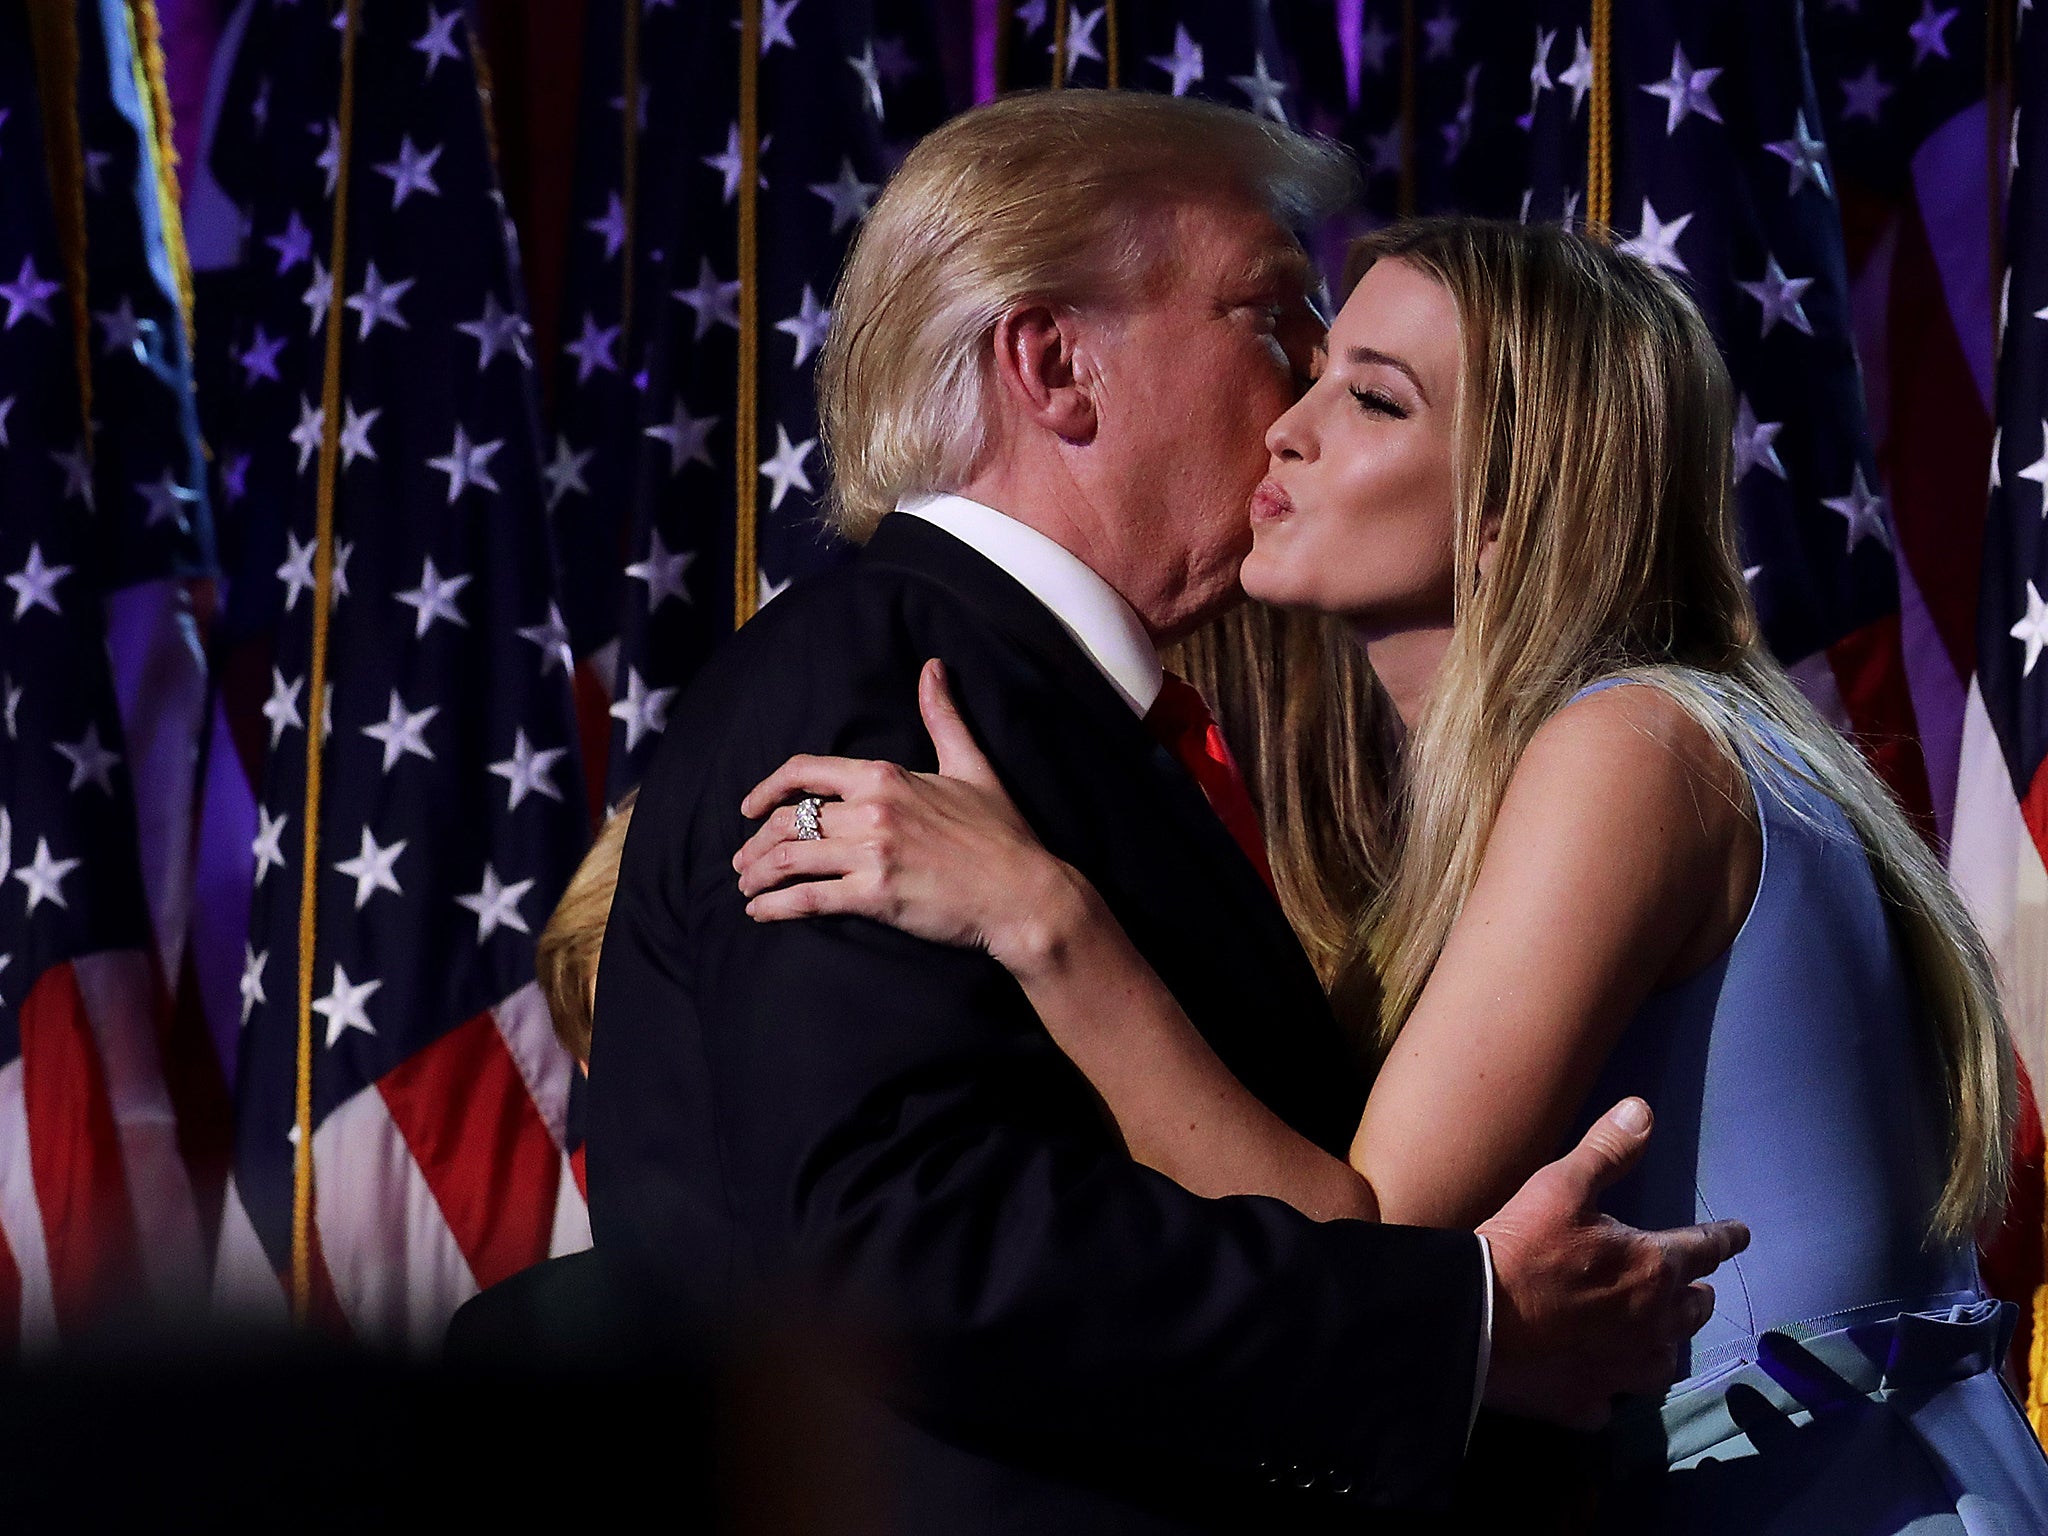 Republican president-elect Donald Trump and his daughter Ivanka Trump embrace after delivering his acceptance speech at the New York Hilton Midtown